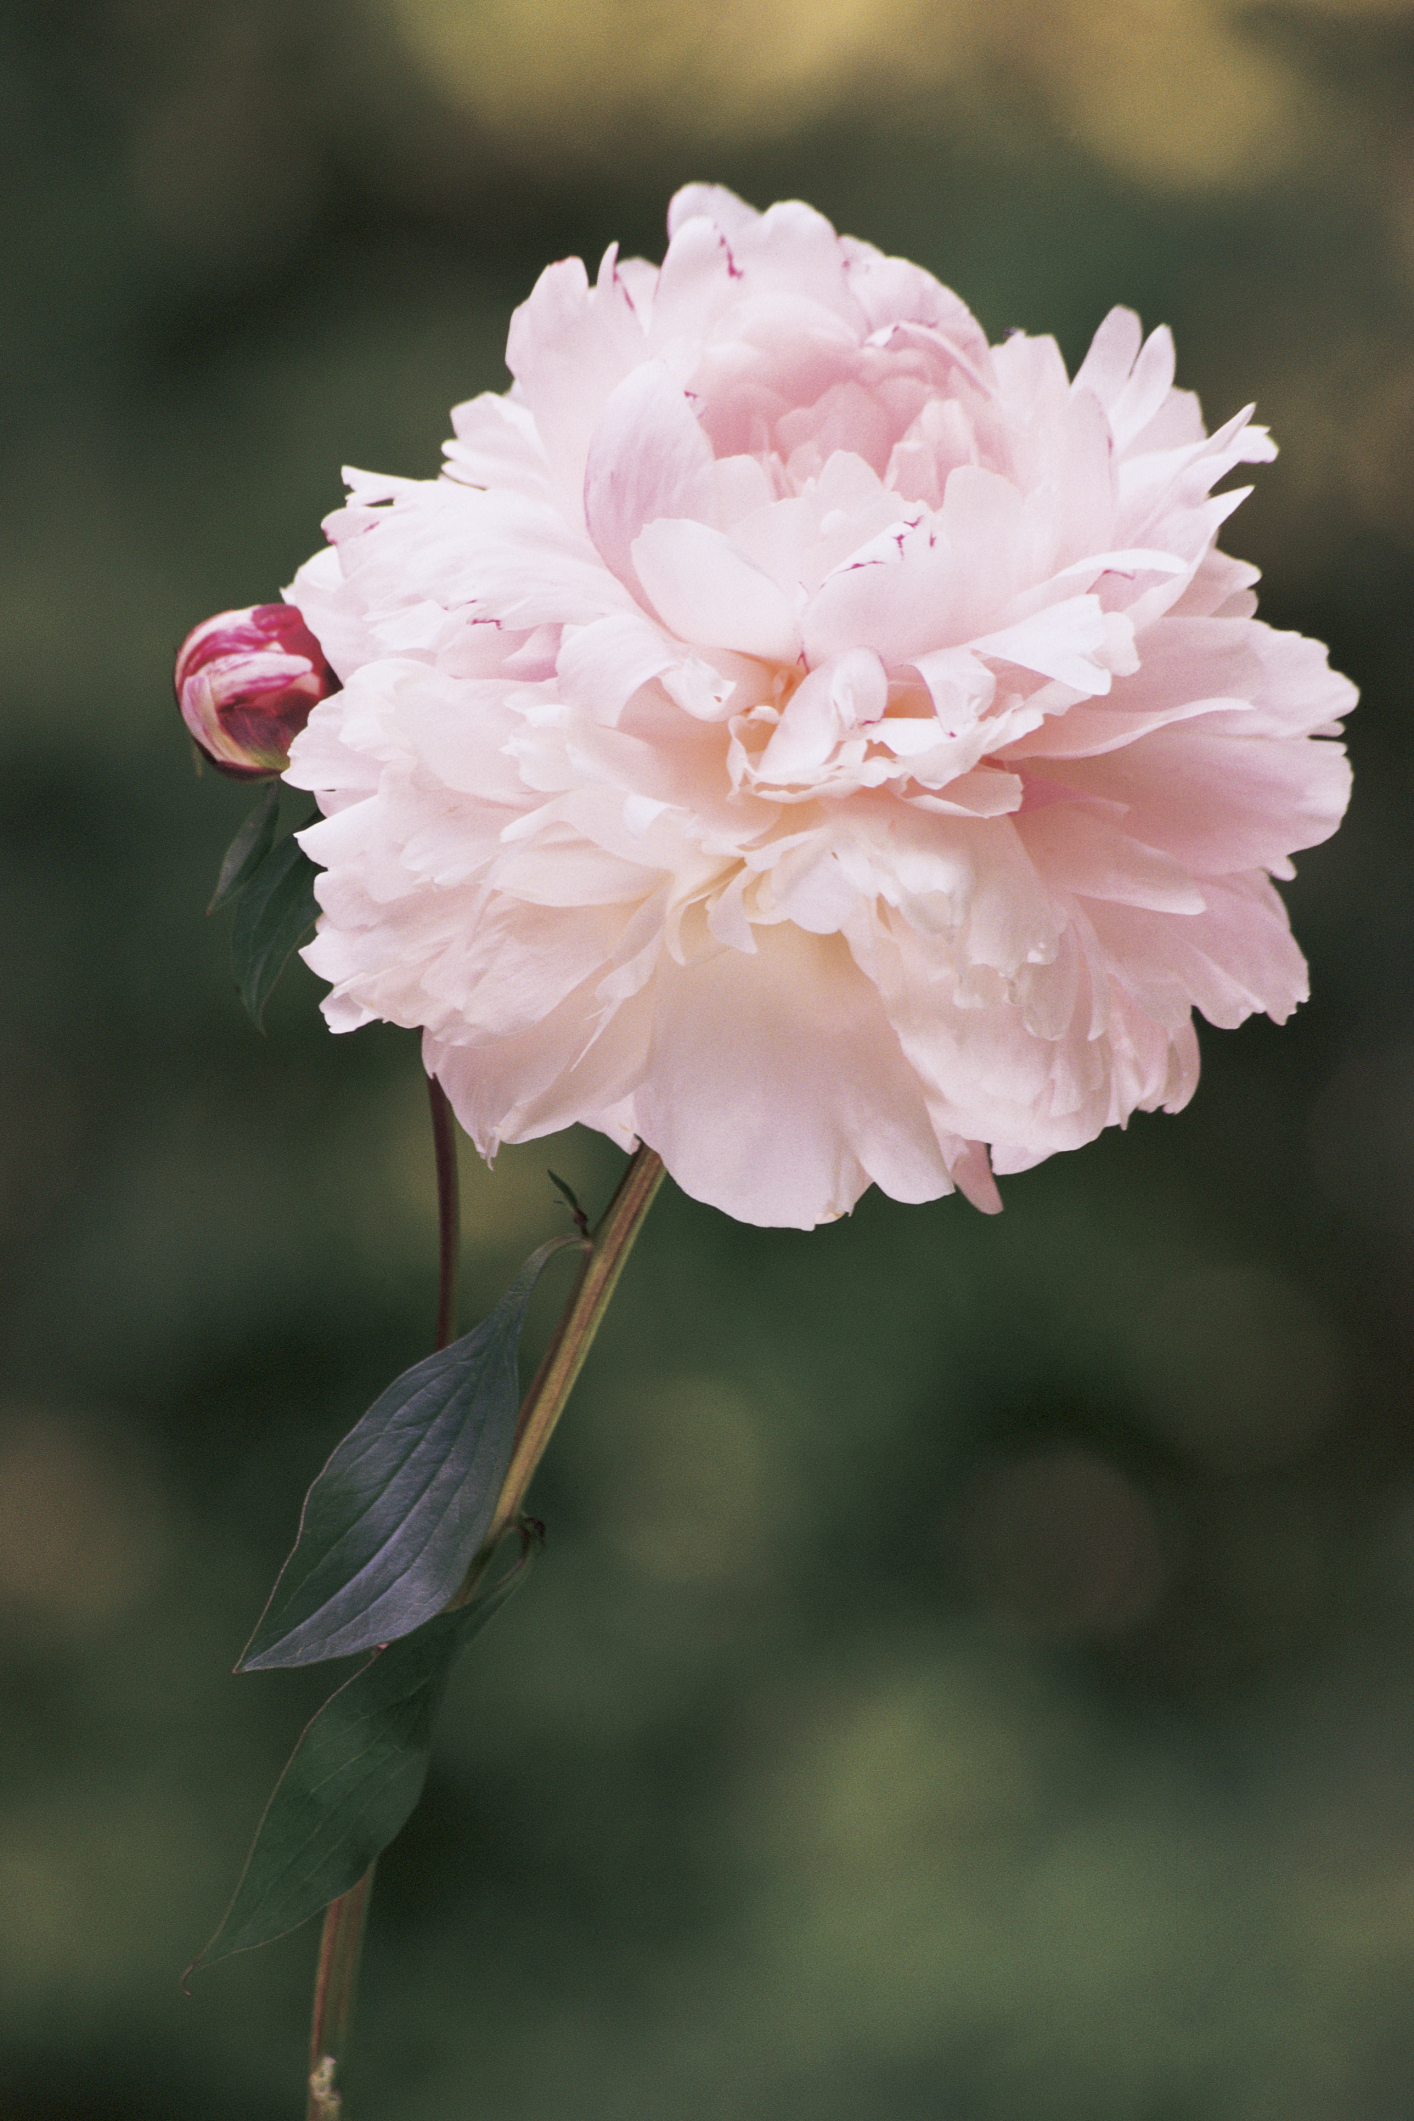 Are Peonies Safe For Cats